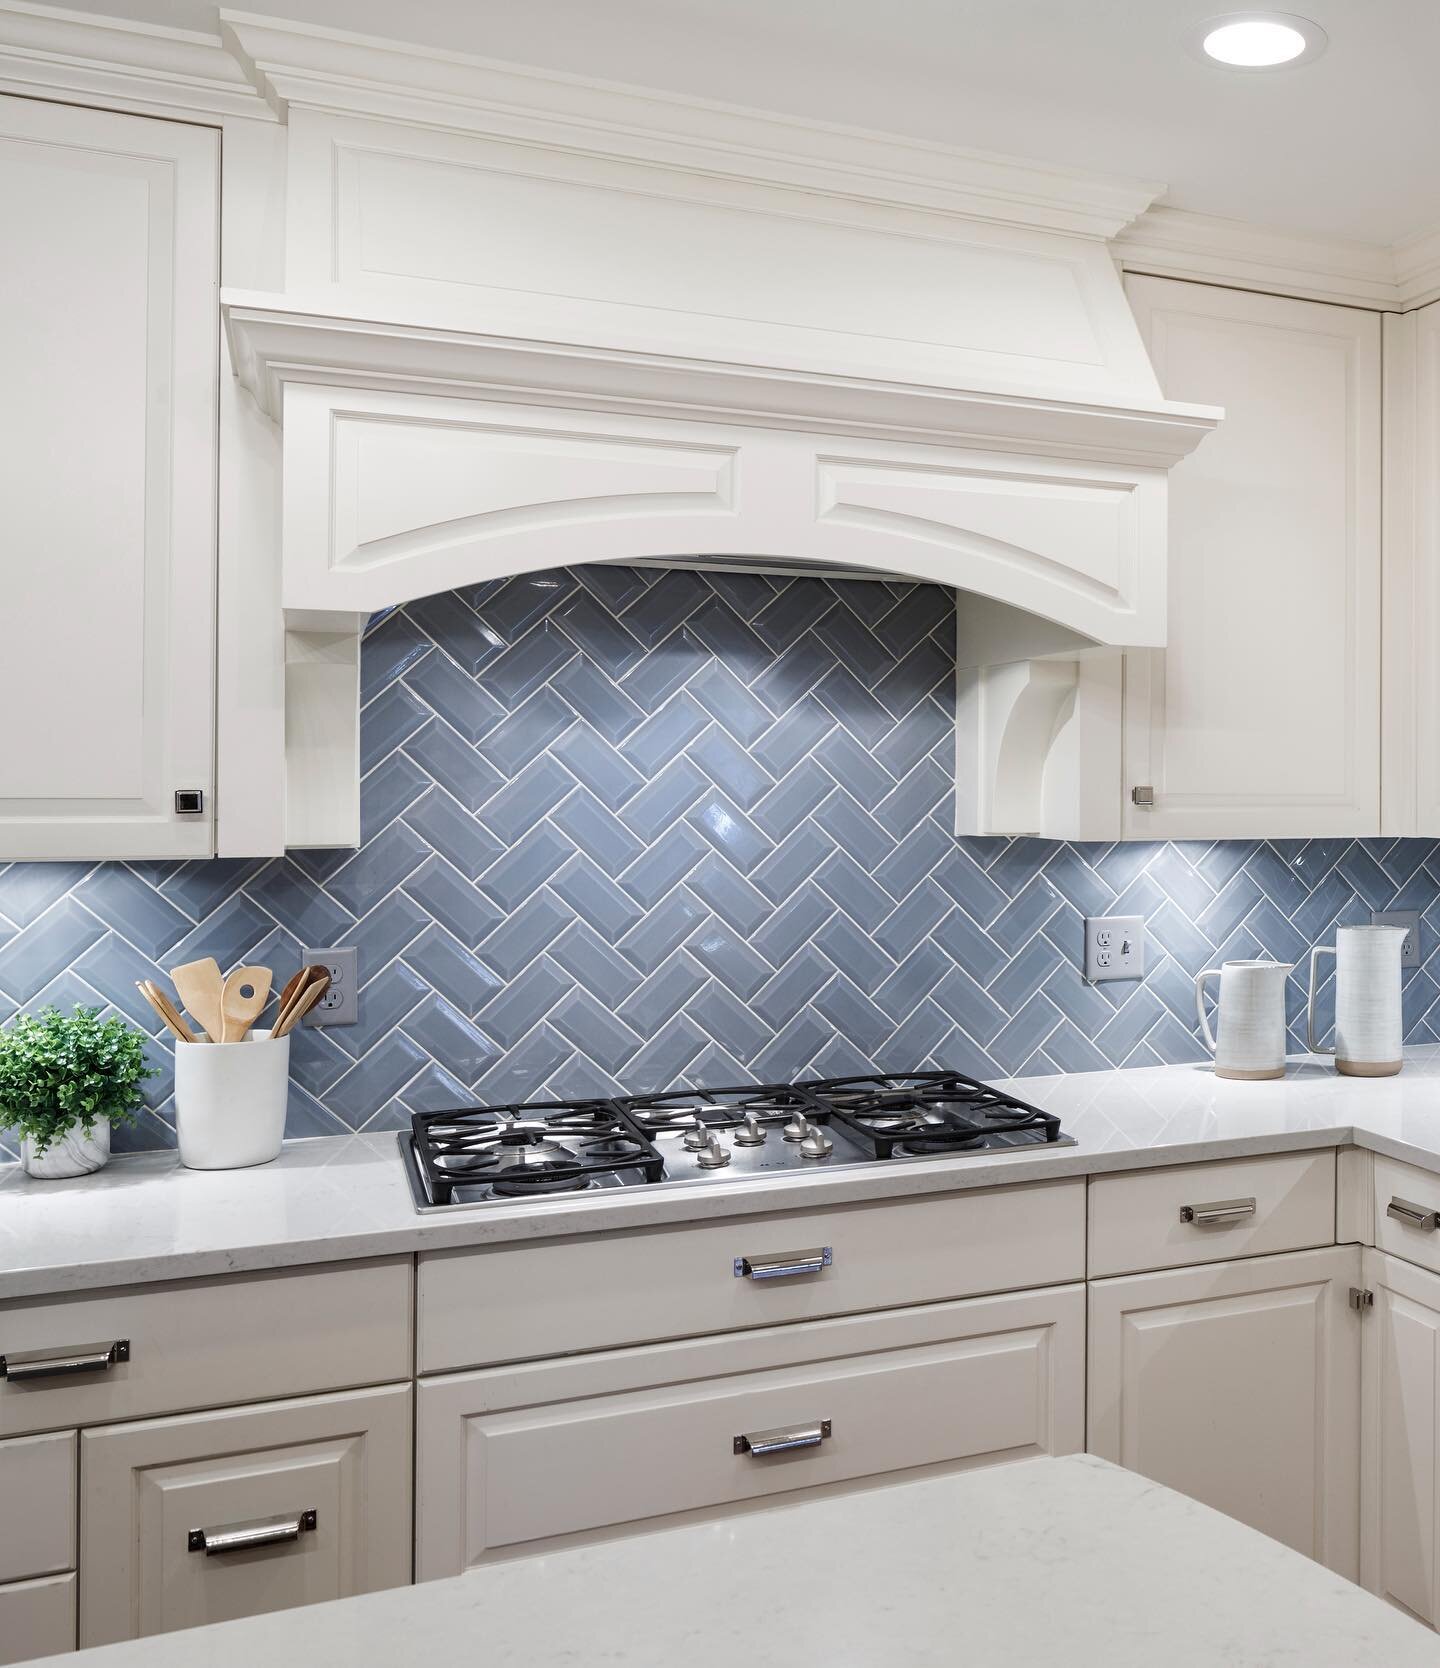 The eye-catching blue tiles evoke the calming waves of the ocean and bring a hint of playfulness to this coastal kitchen renovation. 

Check out the rest of the remodel by clicking the link in our bio.